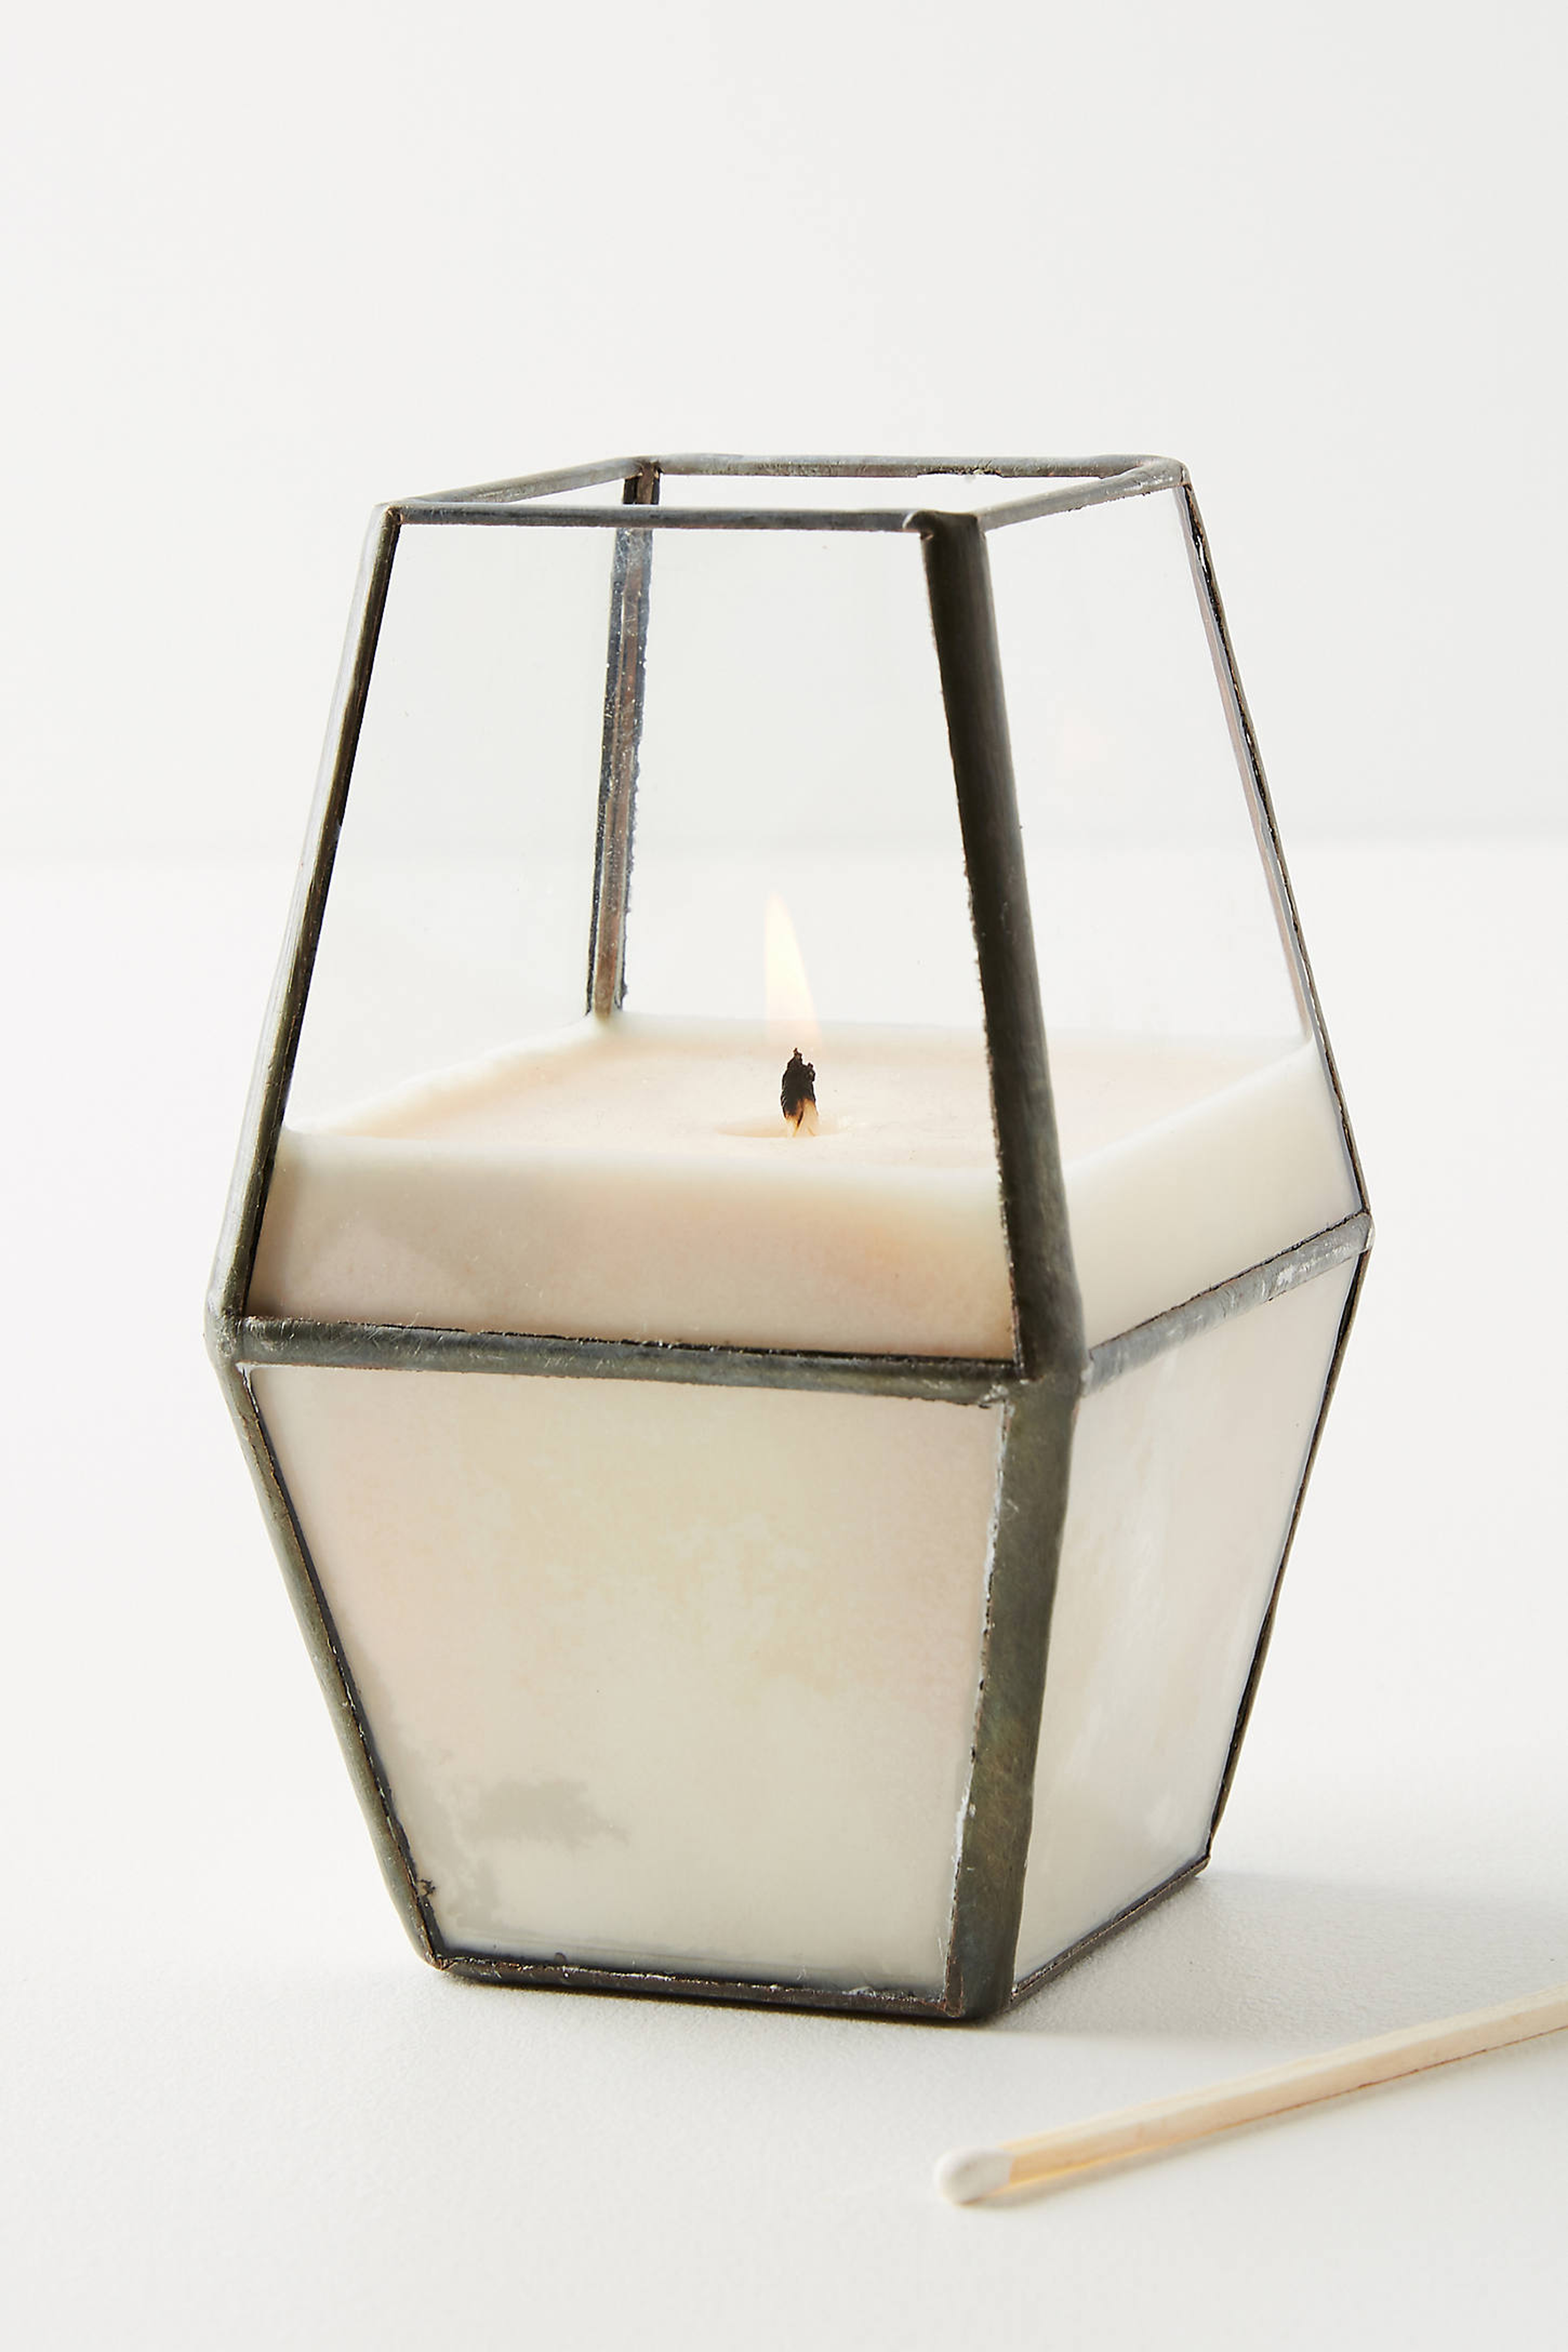 Macbailey Candle Co. Lantern Candle - Anthropologie